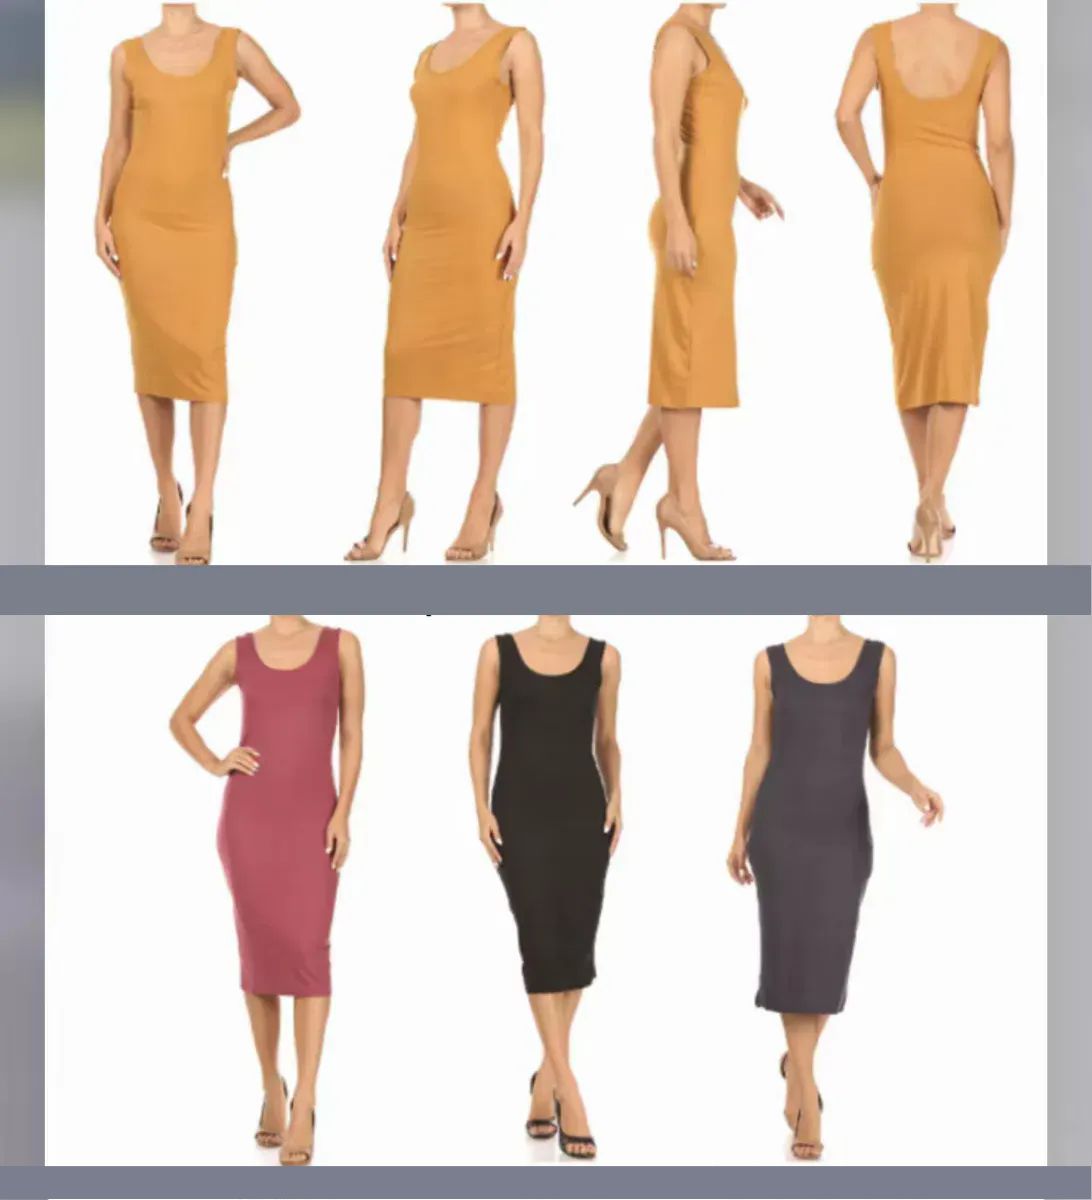 72 Pieces of Womens Fashion Slip Dress In Assorted Colors